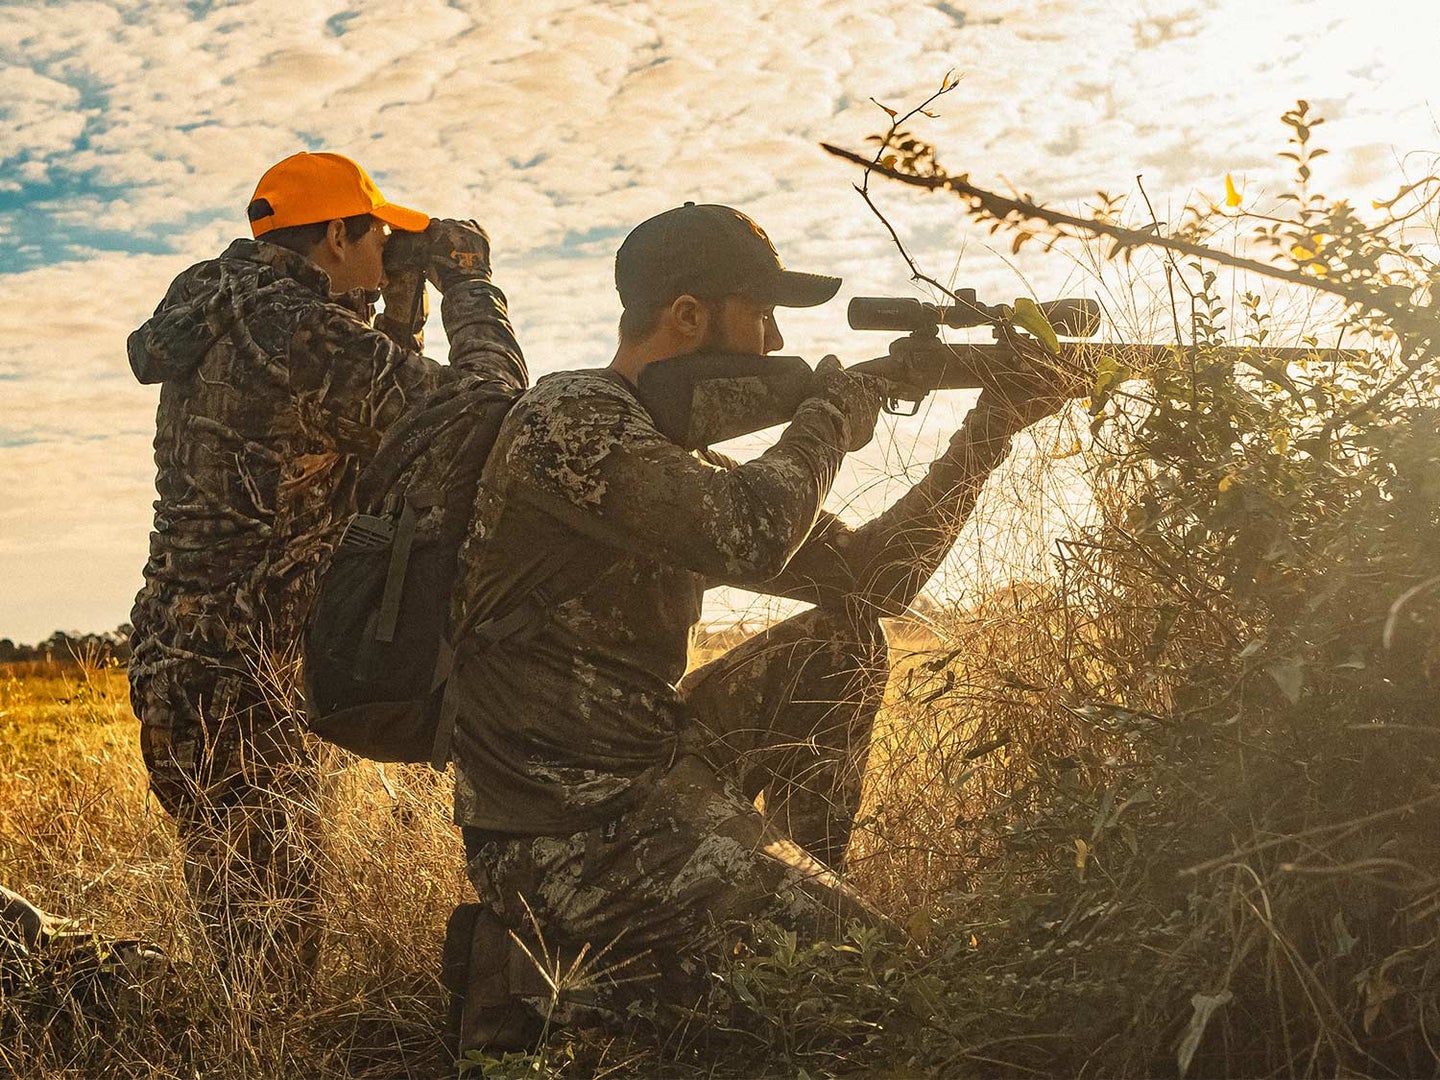 Two hunters kneel, scout, and aim their rifle in an open field.